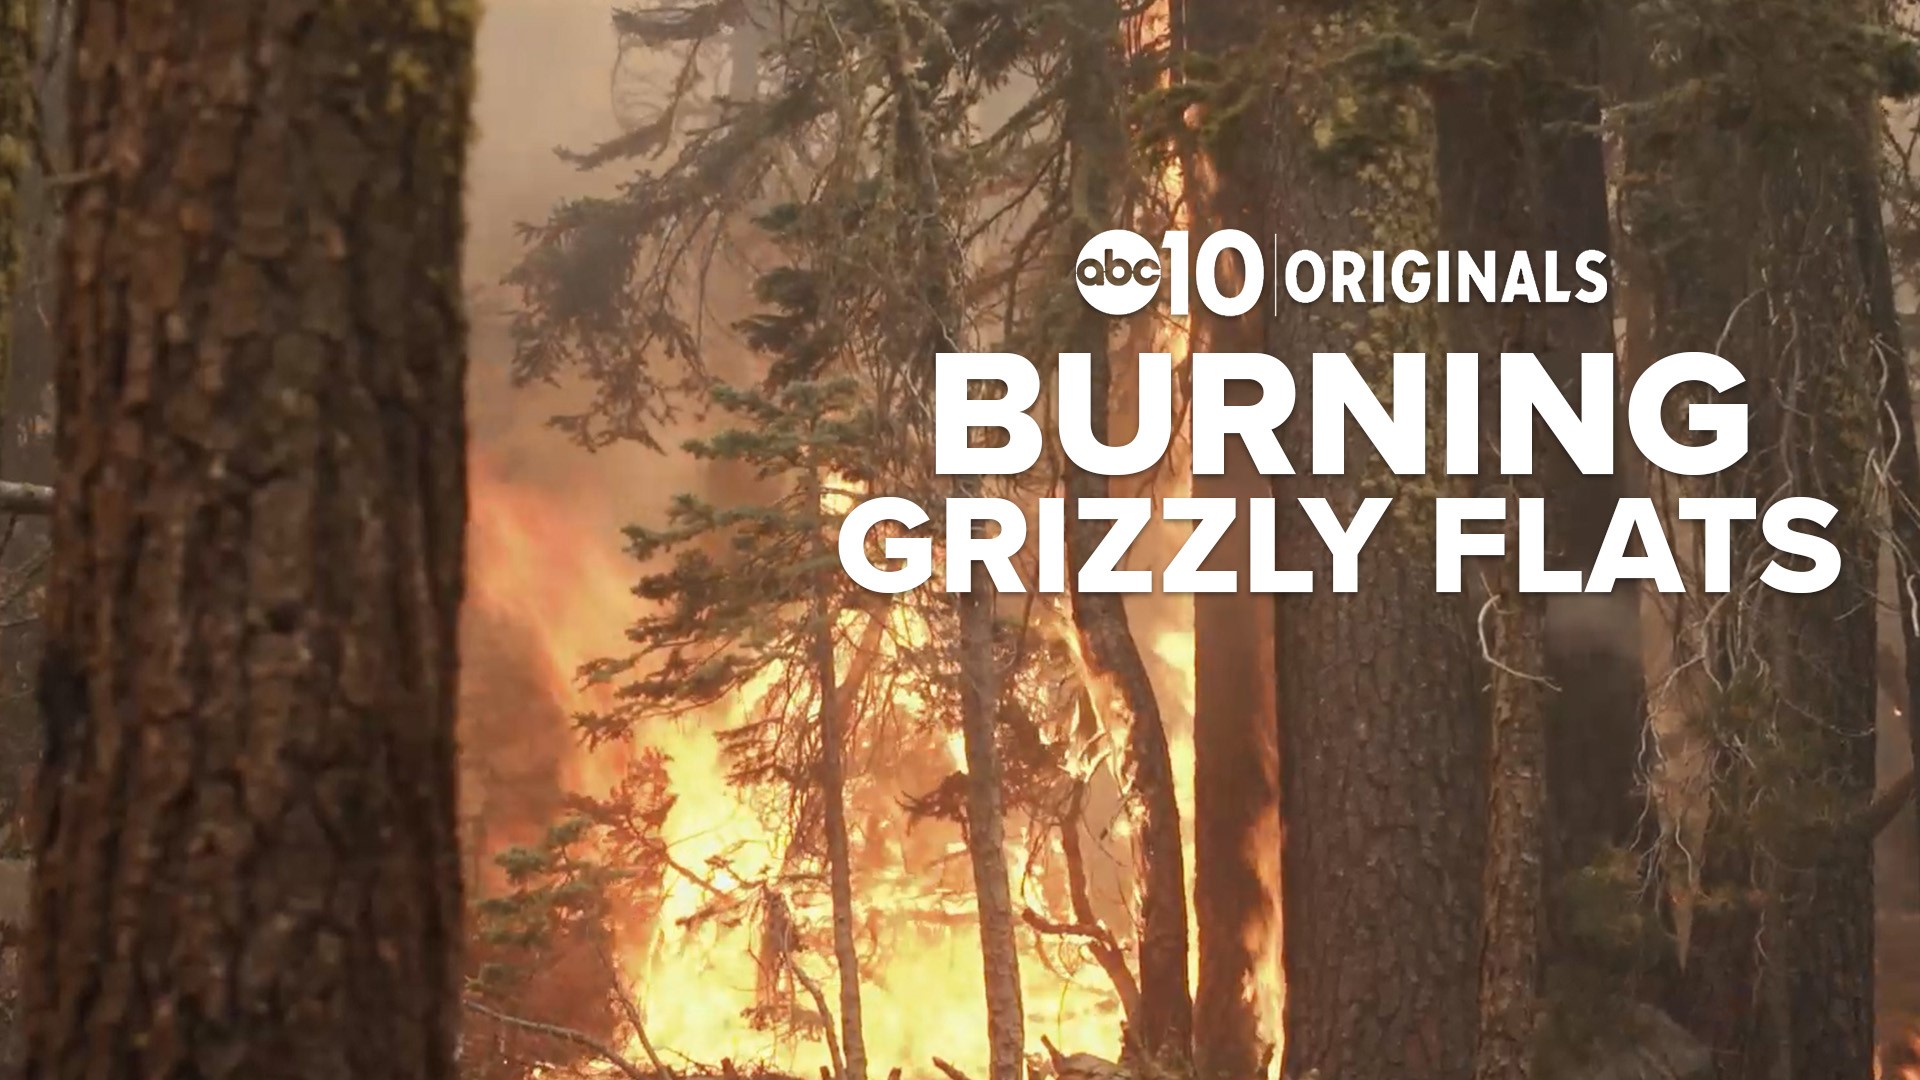 Grizzly Flats was the Caldor Fire's first victim but decades-old studies showed Grizzly could one day burn. Promises were made to protect it, but were not kept.